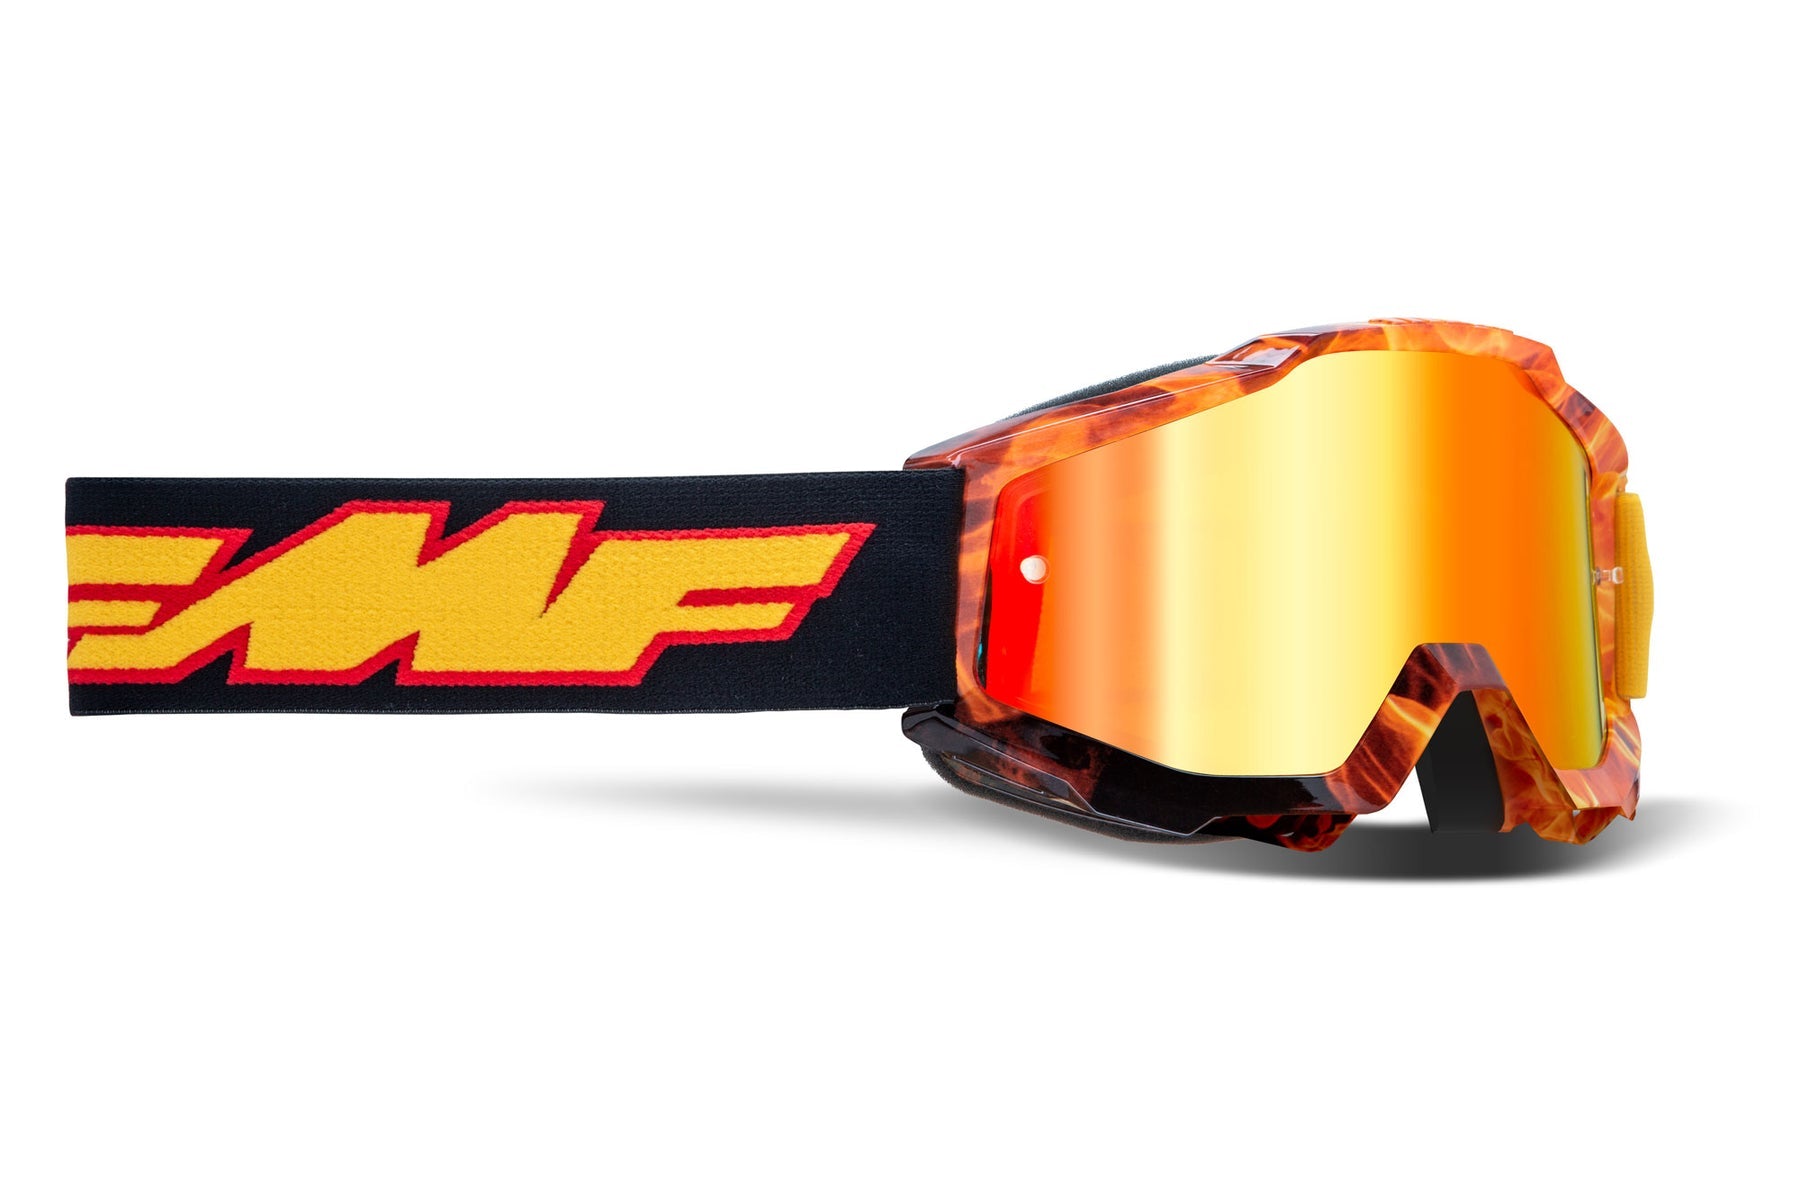 FMF POWERBOMB YOUTH Goggle Spark - Mirror Red Lens